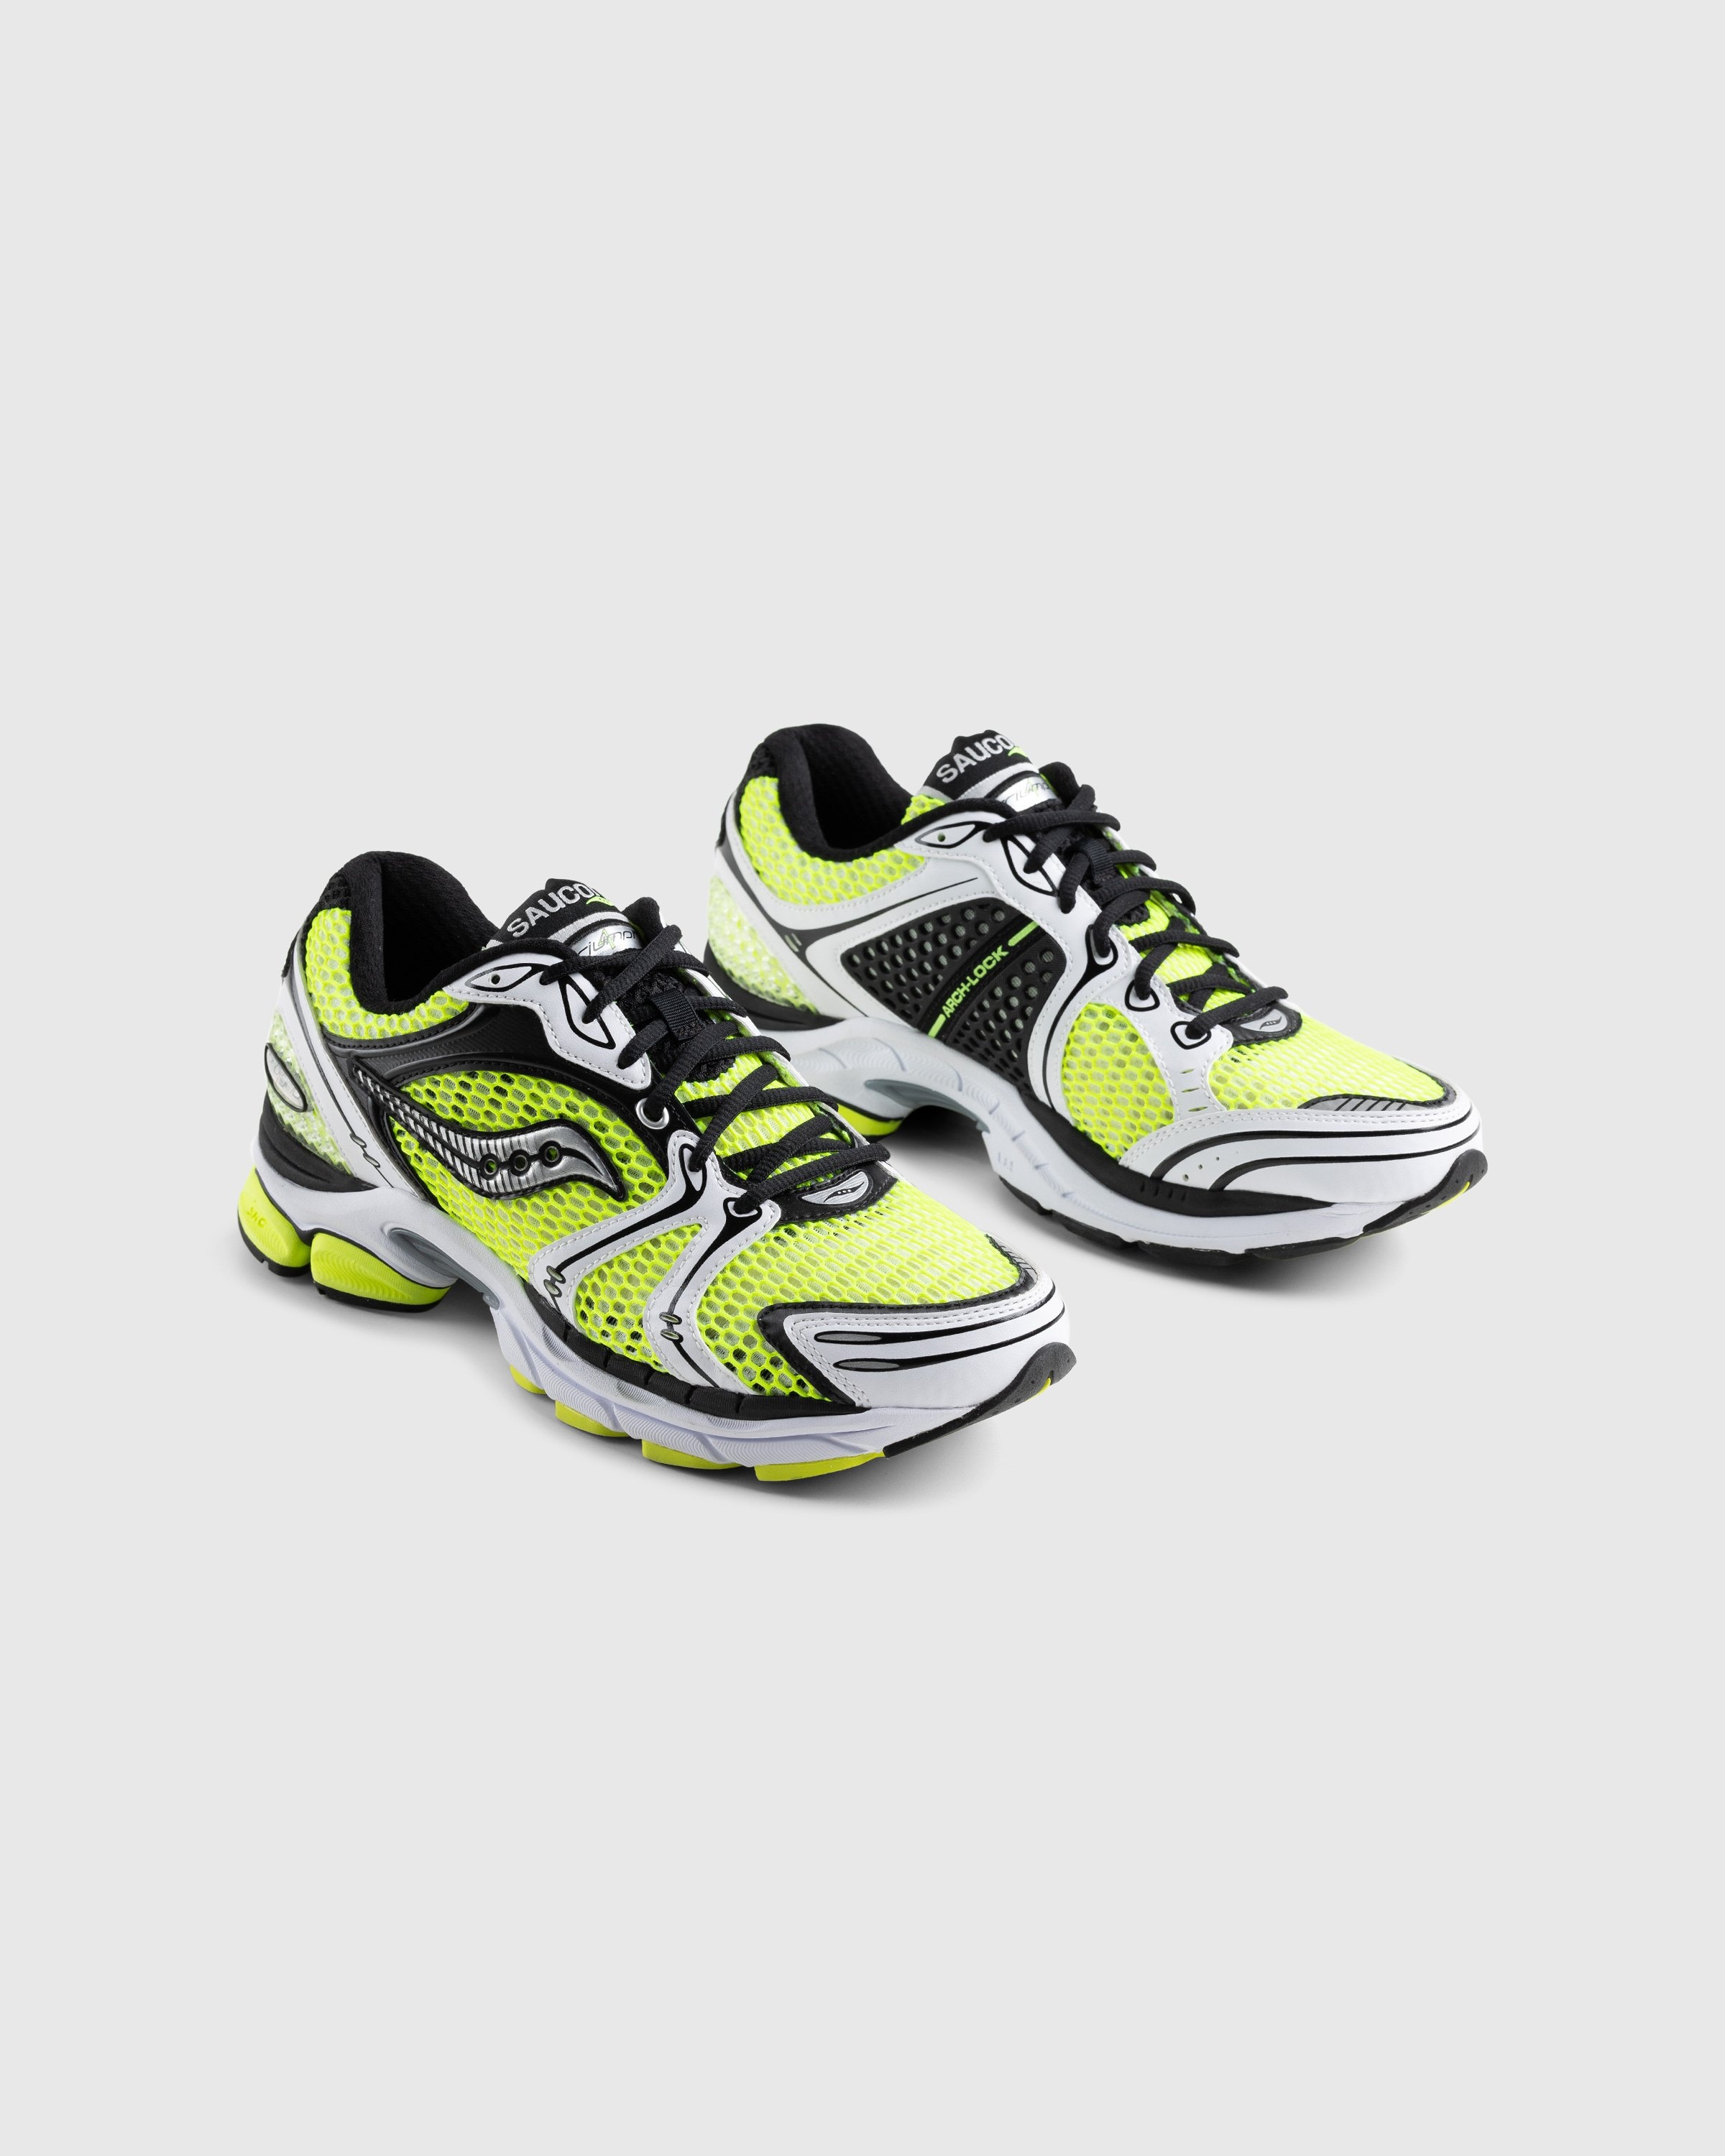 Saucony – ProGrid Triumph 4 Yellow/Silver - Sneakers - Yellow - Image 3